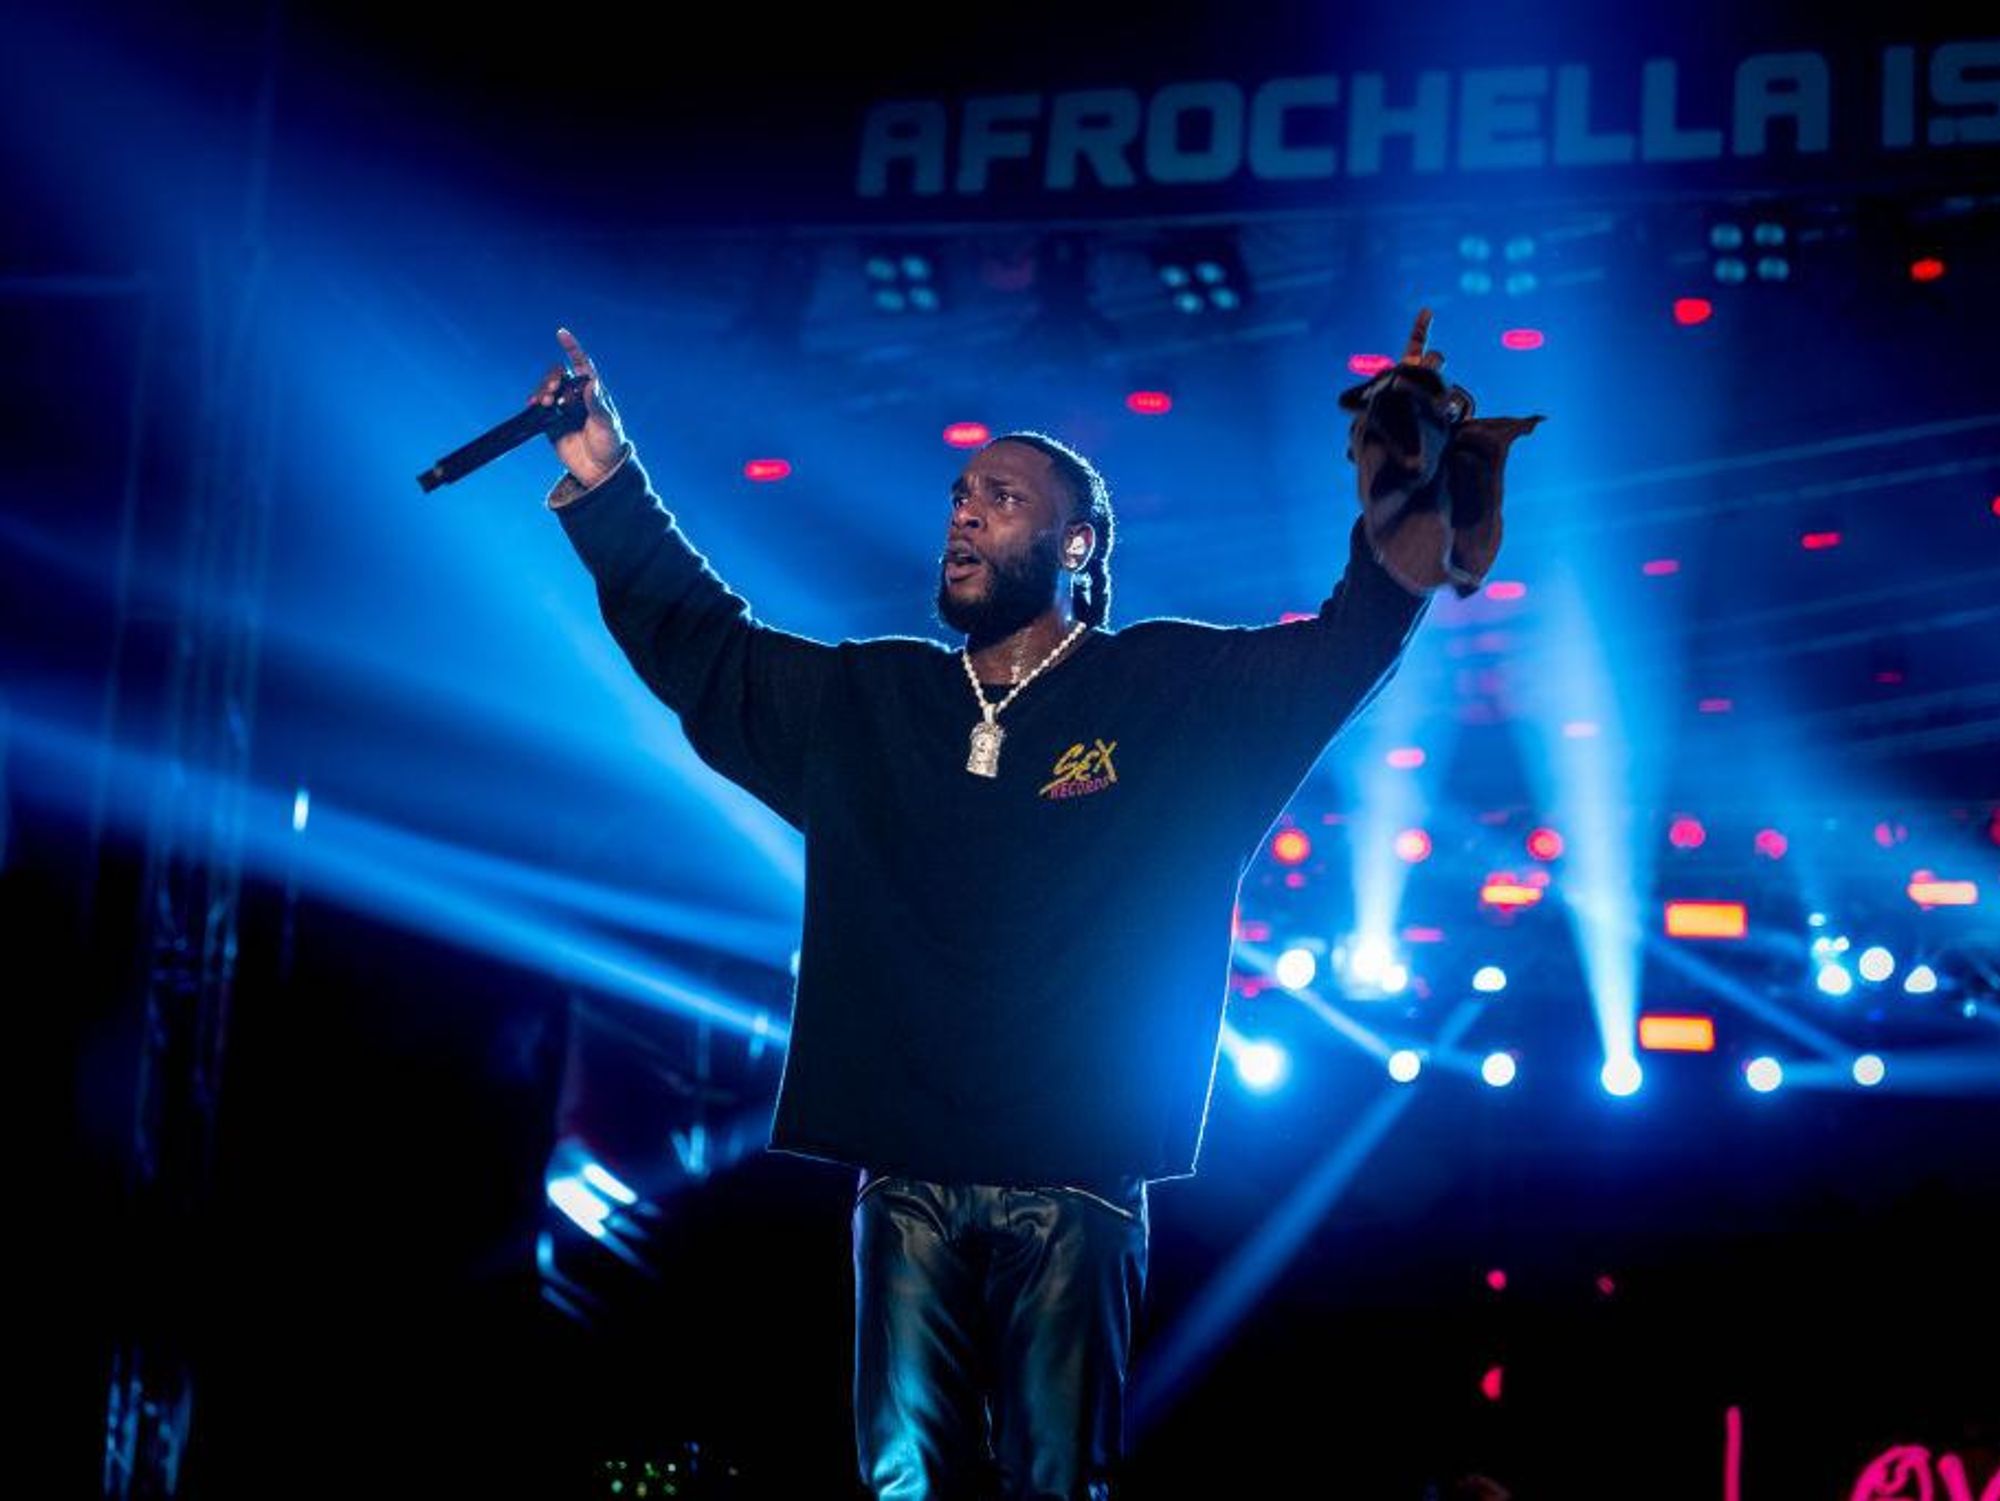 burna boy performs onstage at afrochella music festival in ghana